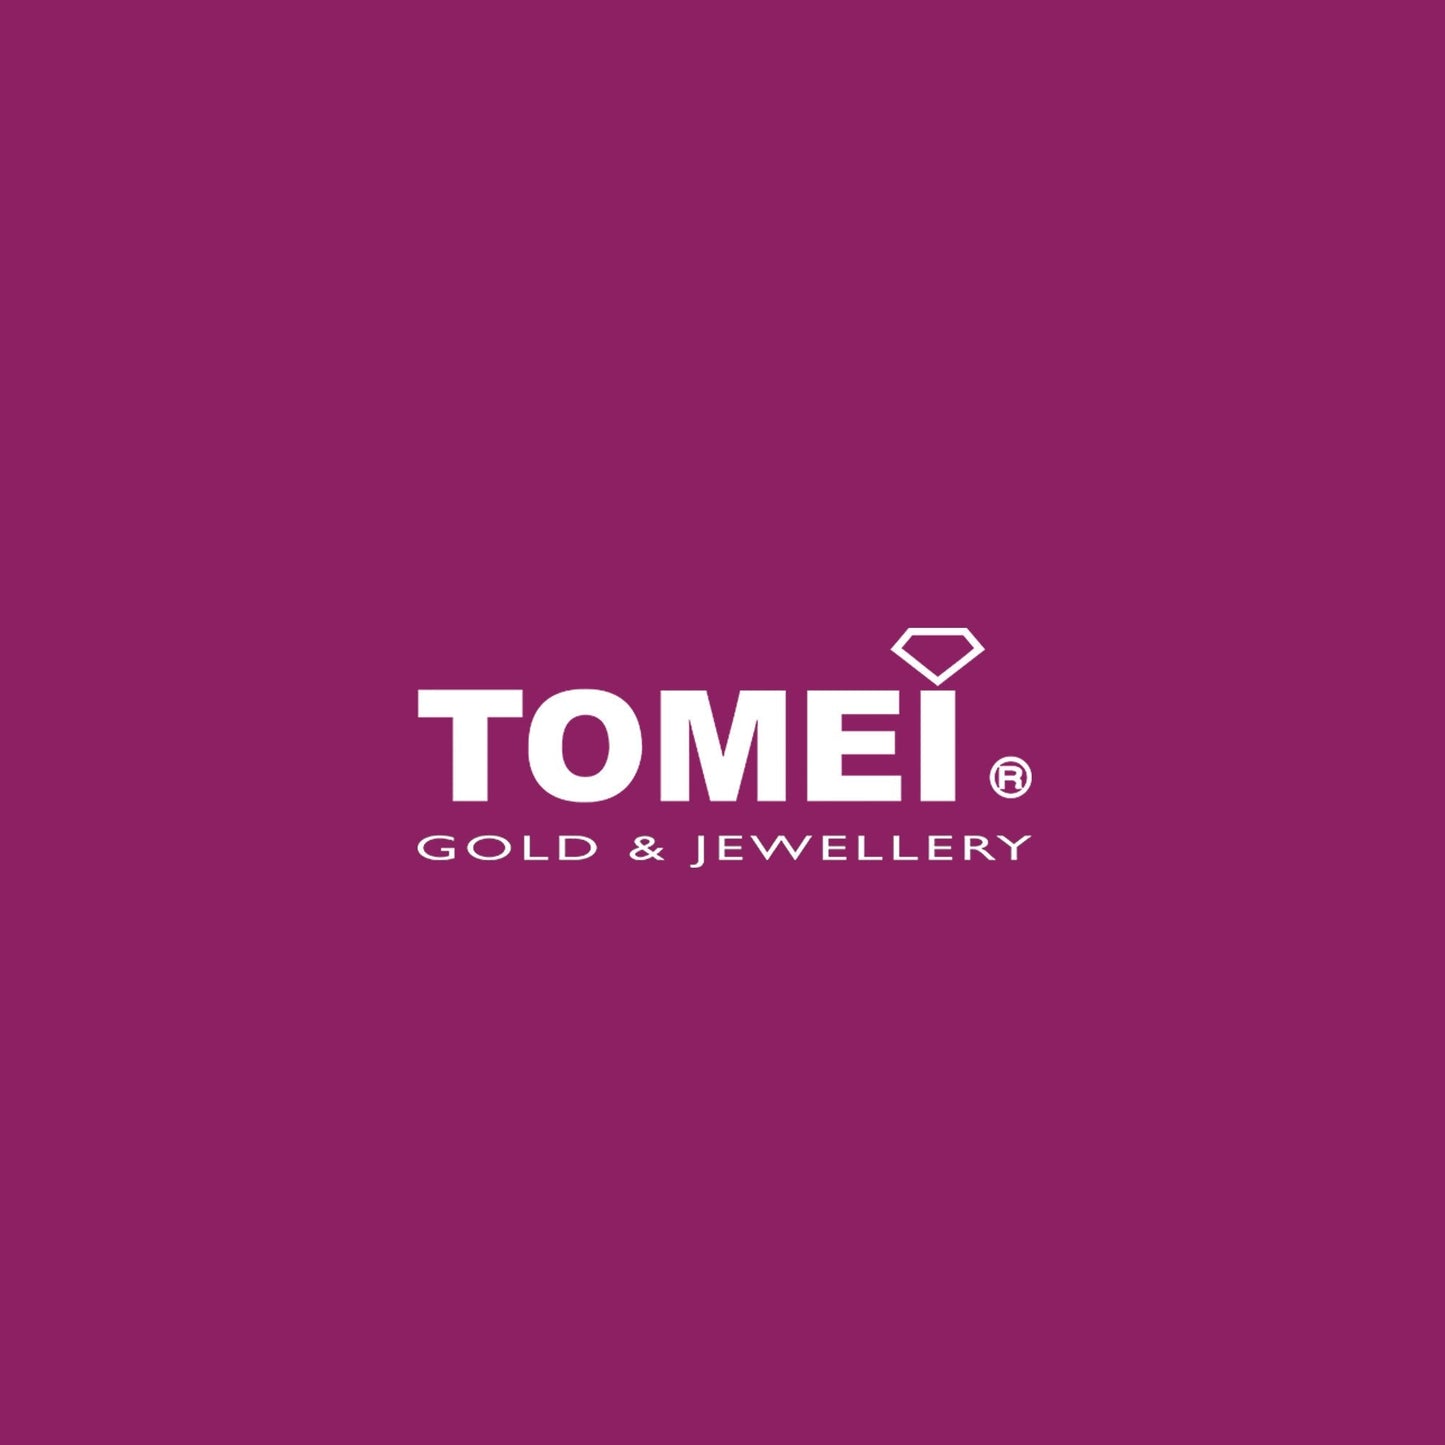 TOMEI Hand in Hand Forever Charm, Yellow Gold 916